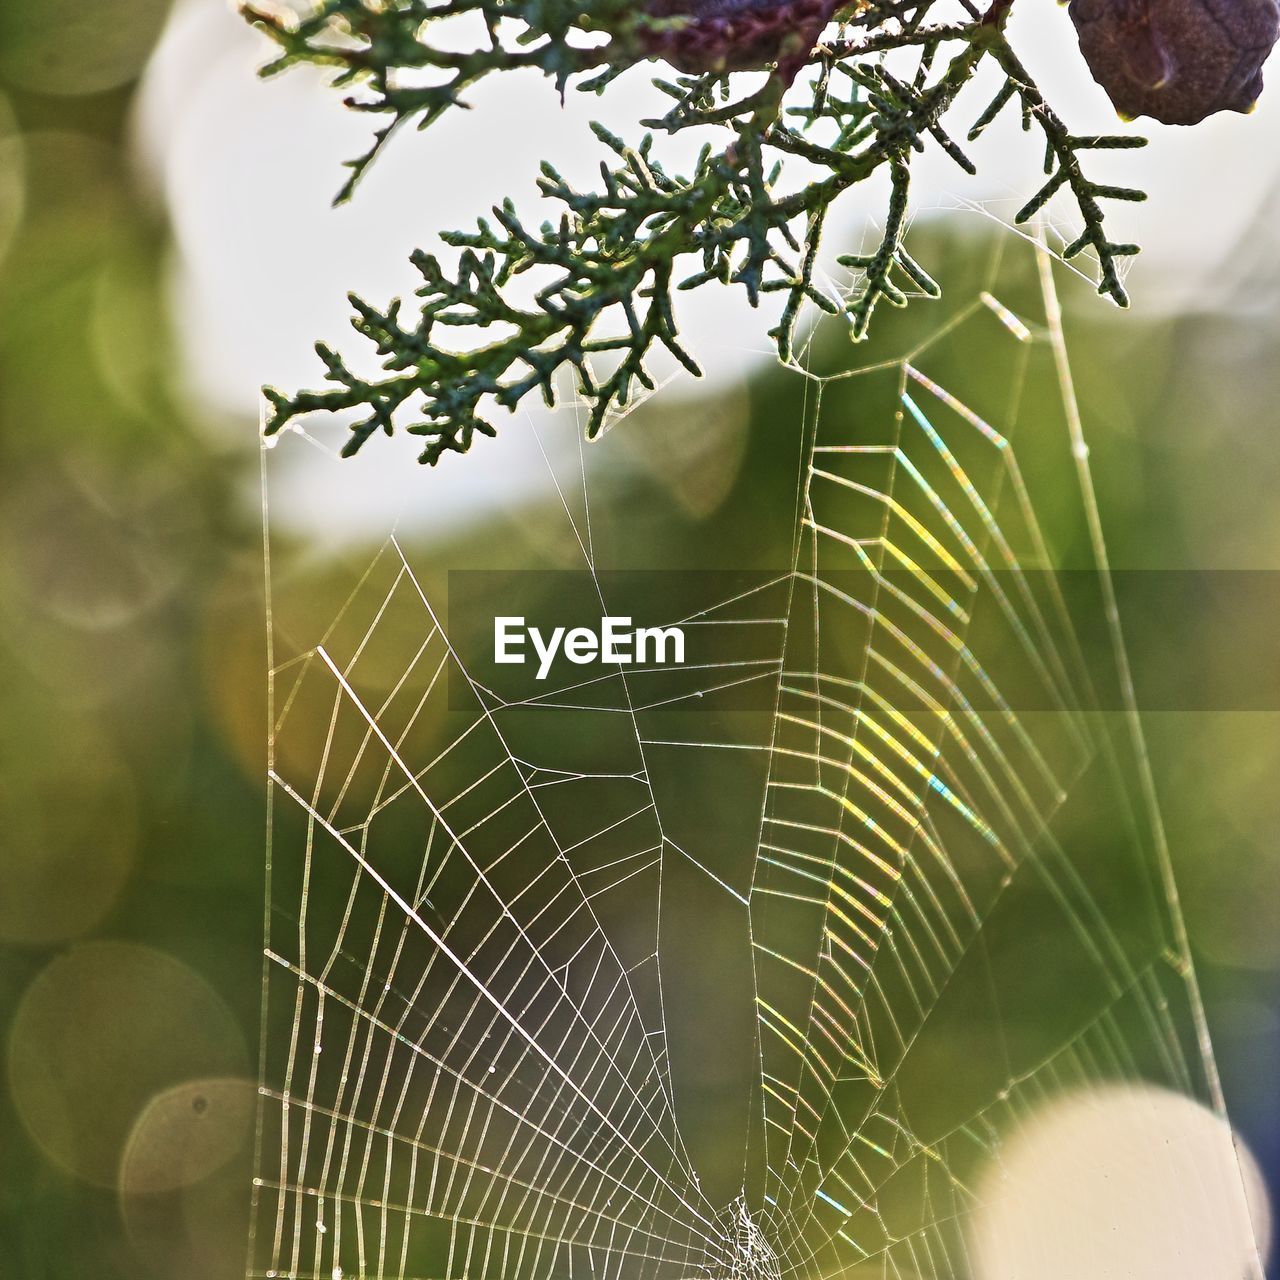 CLOSE-UP OF SPIDER WEB ON PLANT